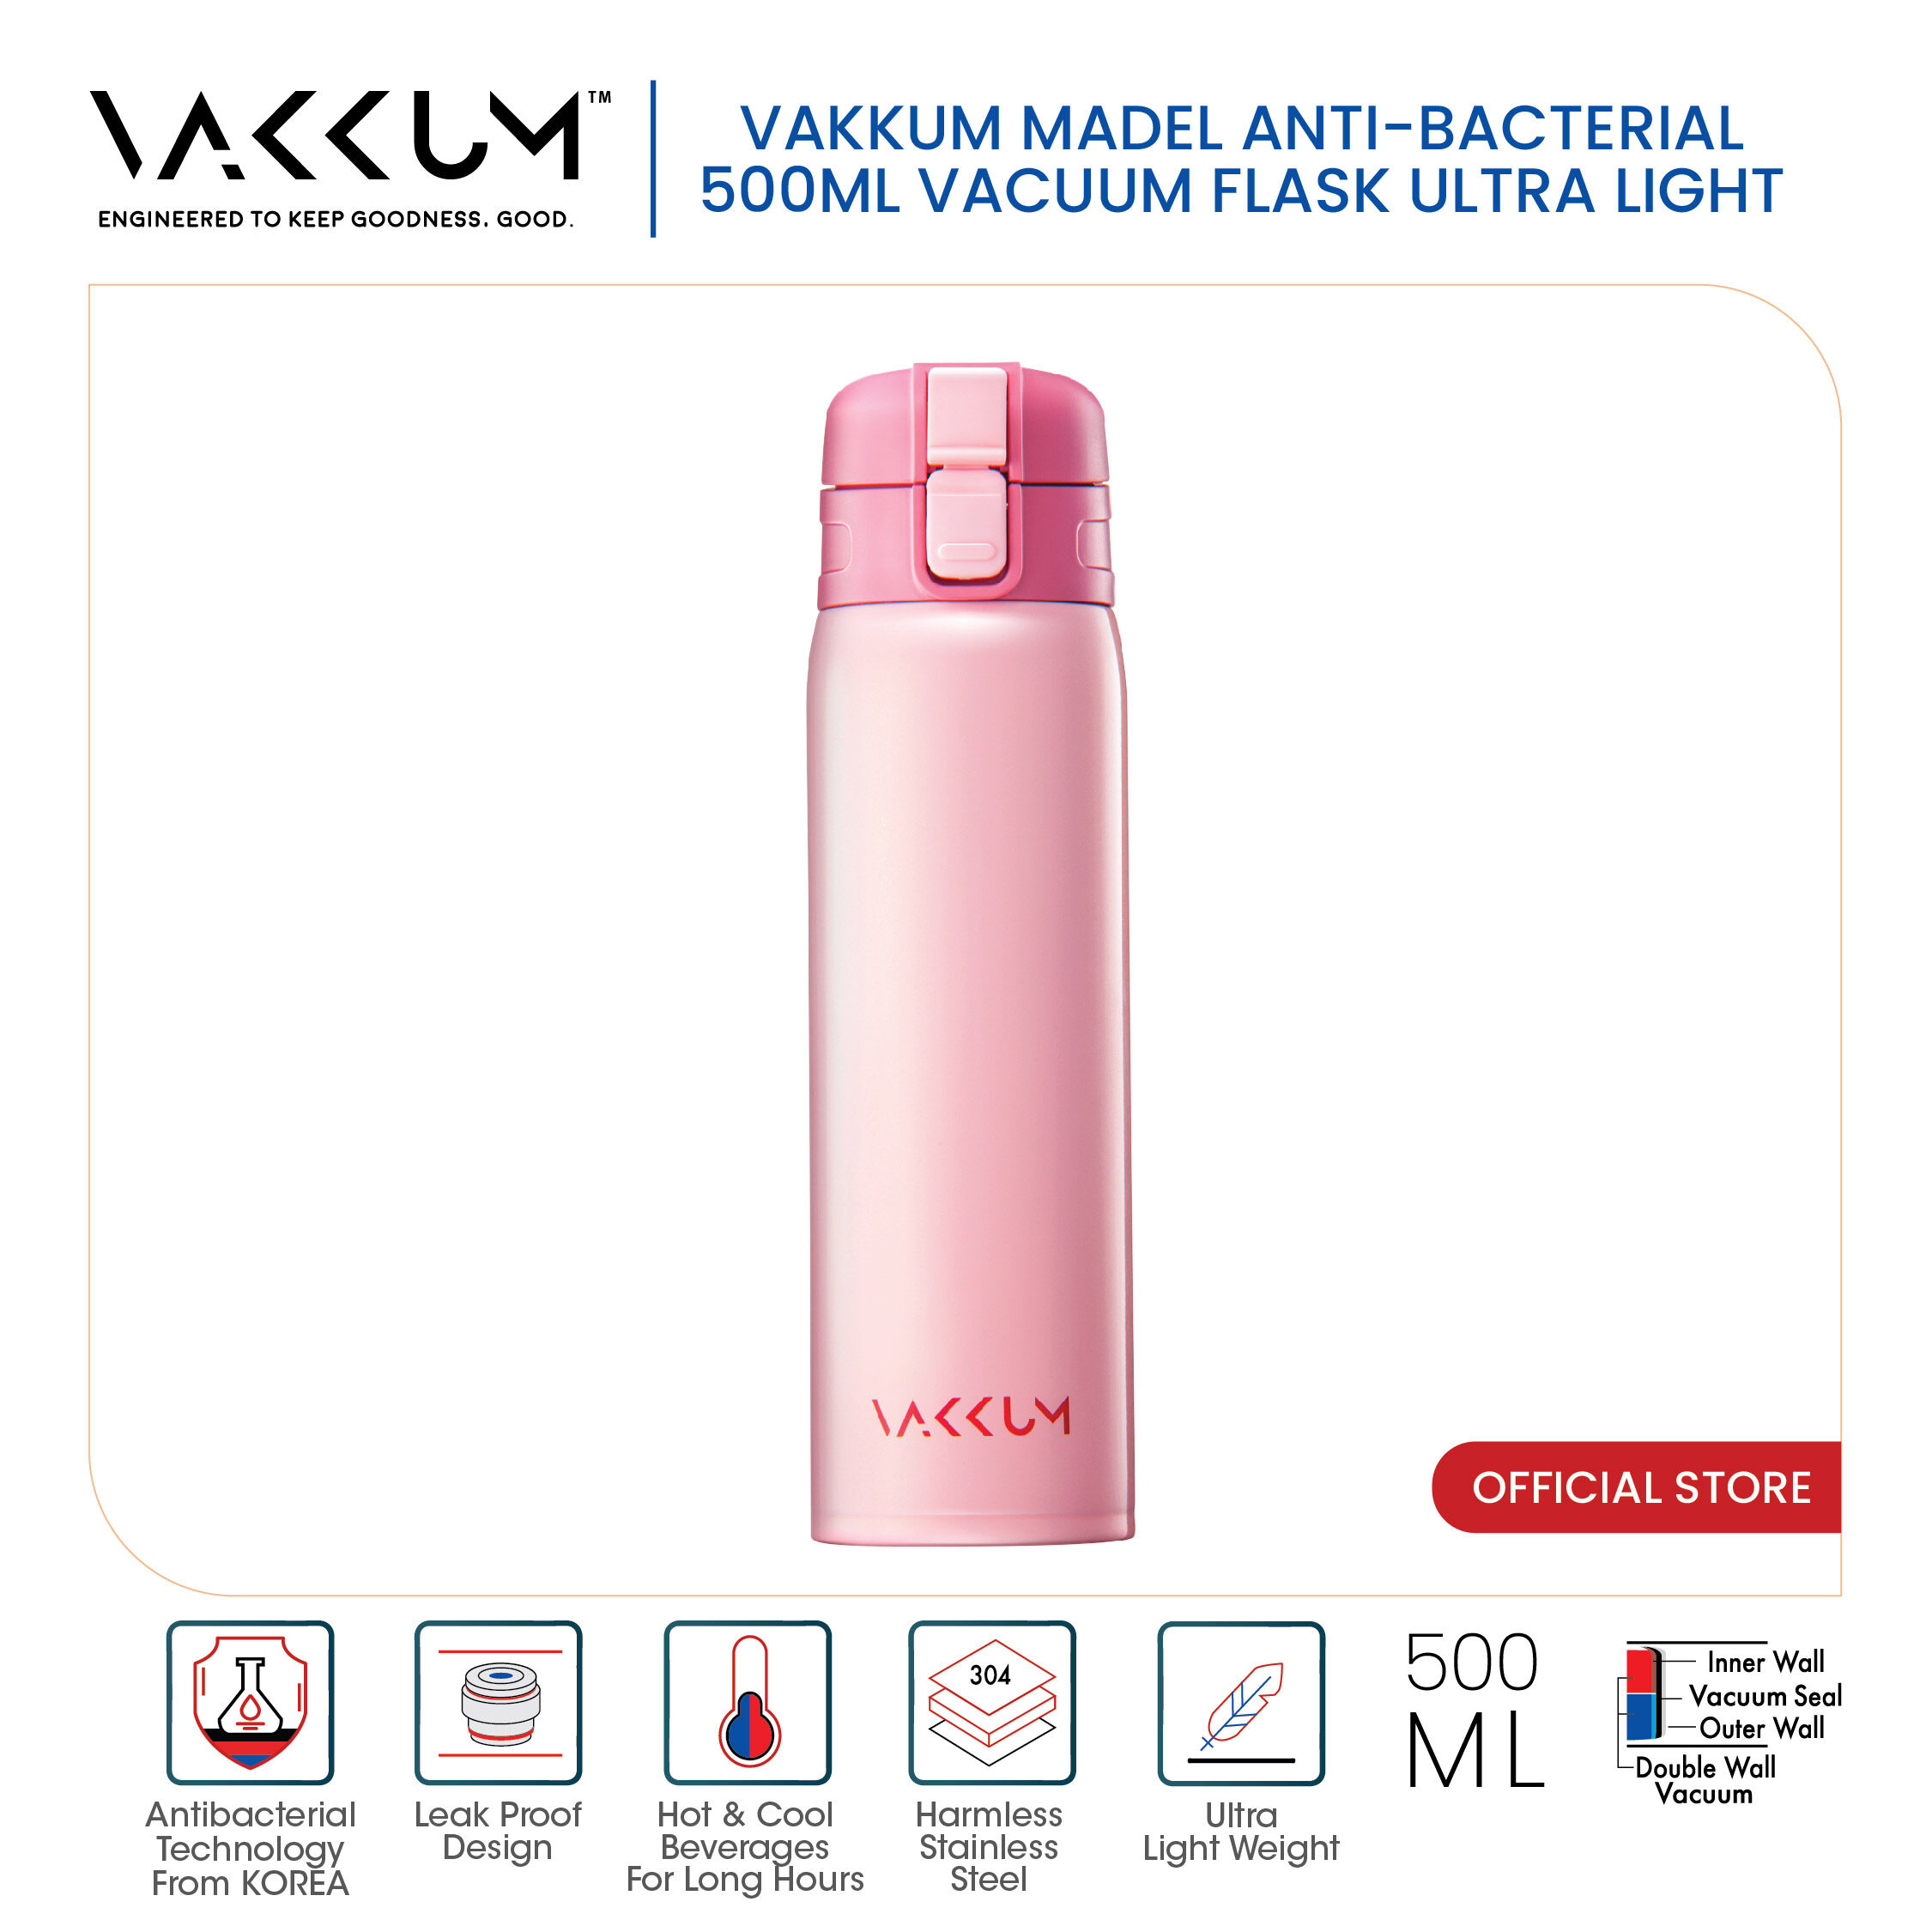 [OASIS SWISS] ANTI-BACTERIAL VAKKUM MADEL FLASK 500ml DOUBLE WALL S.S. BLUE@PINK - VK-200450-LE